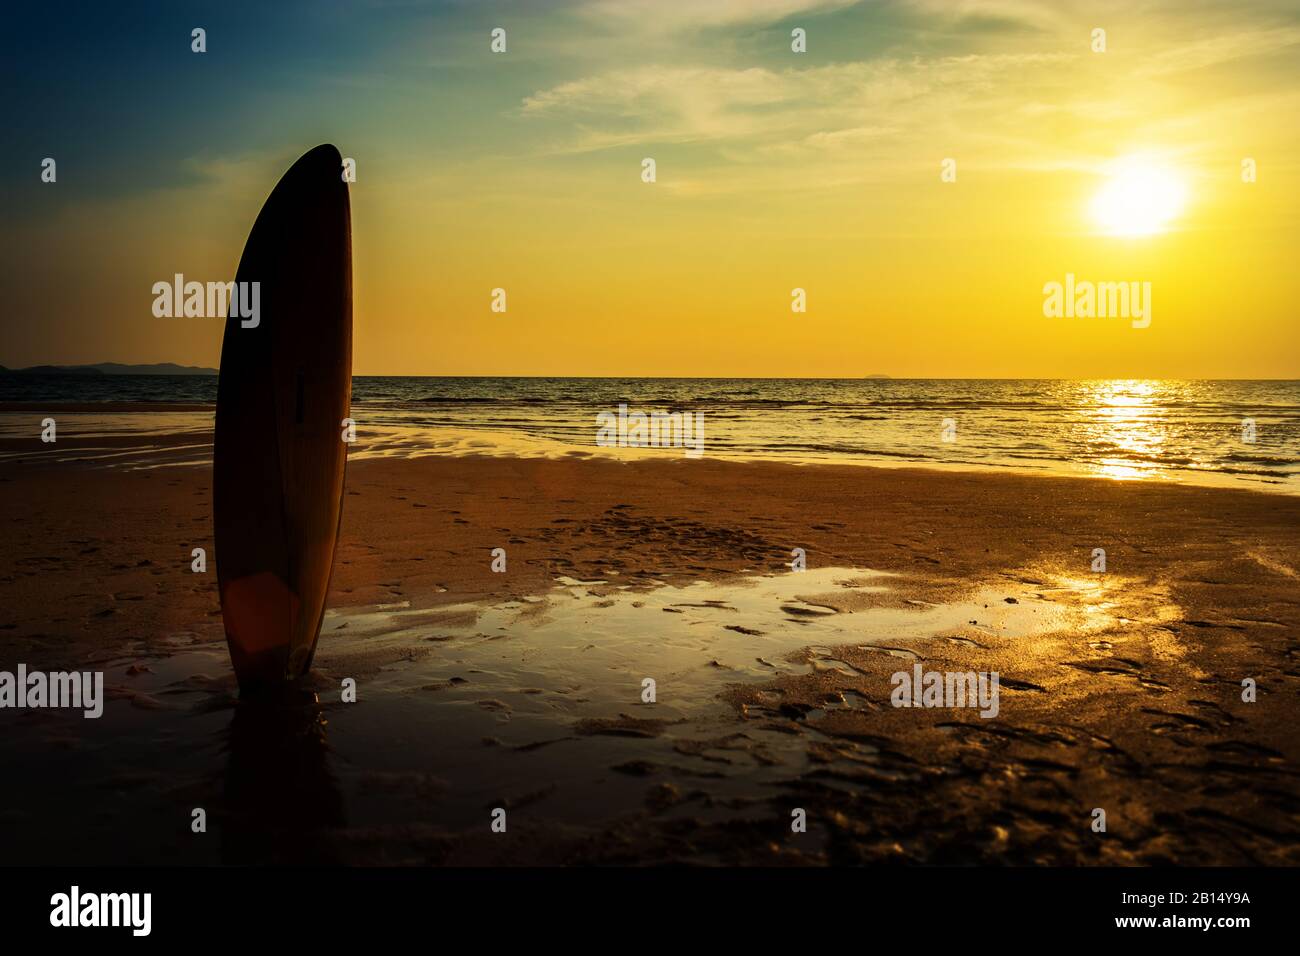 Surfing for water sport outdoor activity lifestyle concept. Silhouette of surfboard on the beach in sea shore at sunset time with beautiful light. Stock Photo